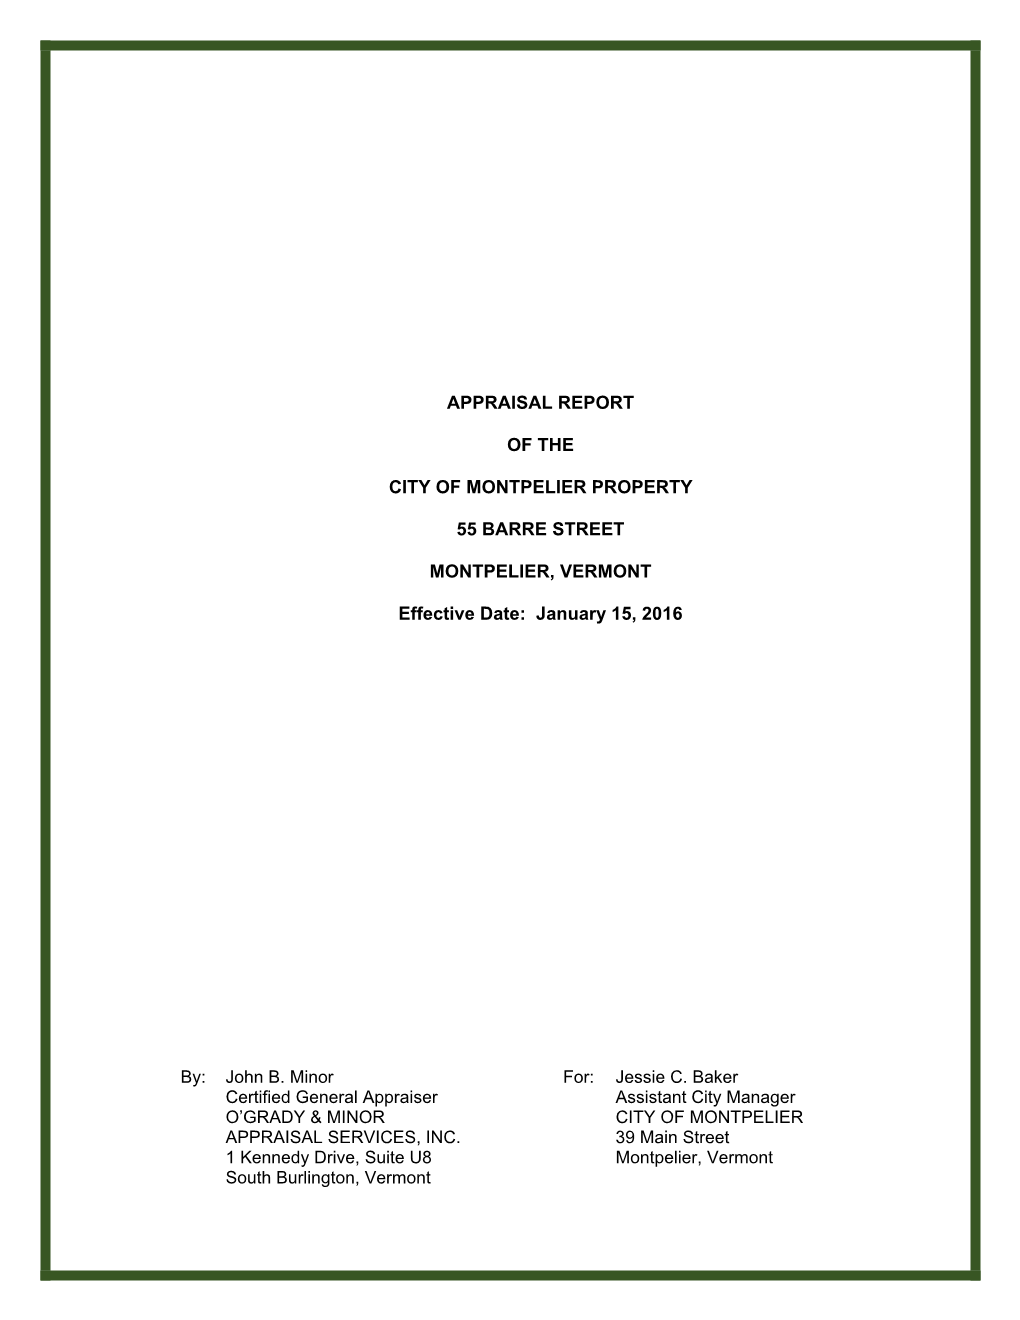 APPRAISAL REPORT of the CITY of MONTPELIER PROPERTY 55 BARRE STREET MONTPELIER, VERMONT Effective Date: January 15, 2016